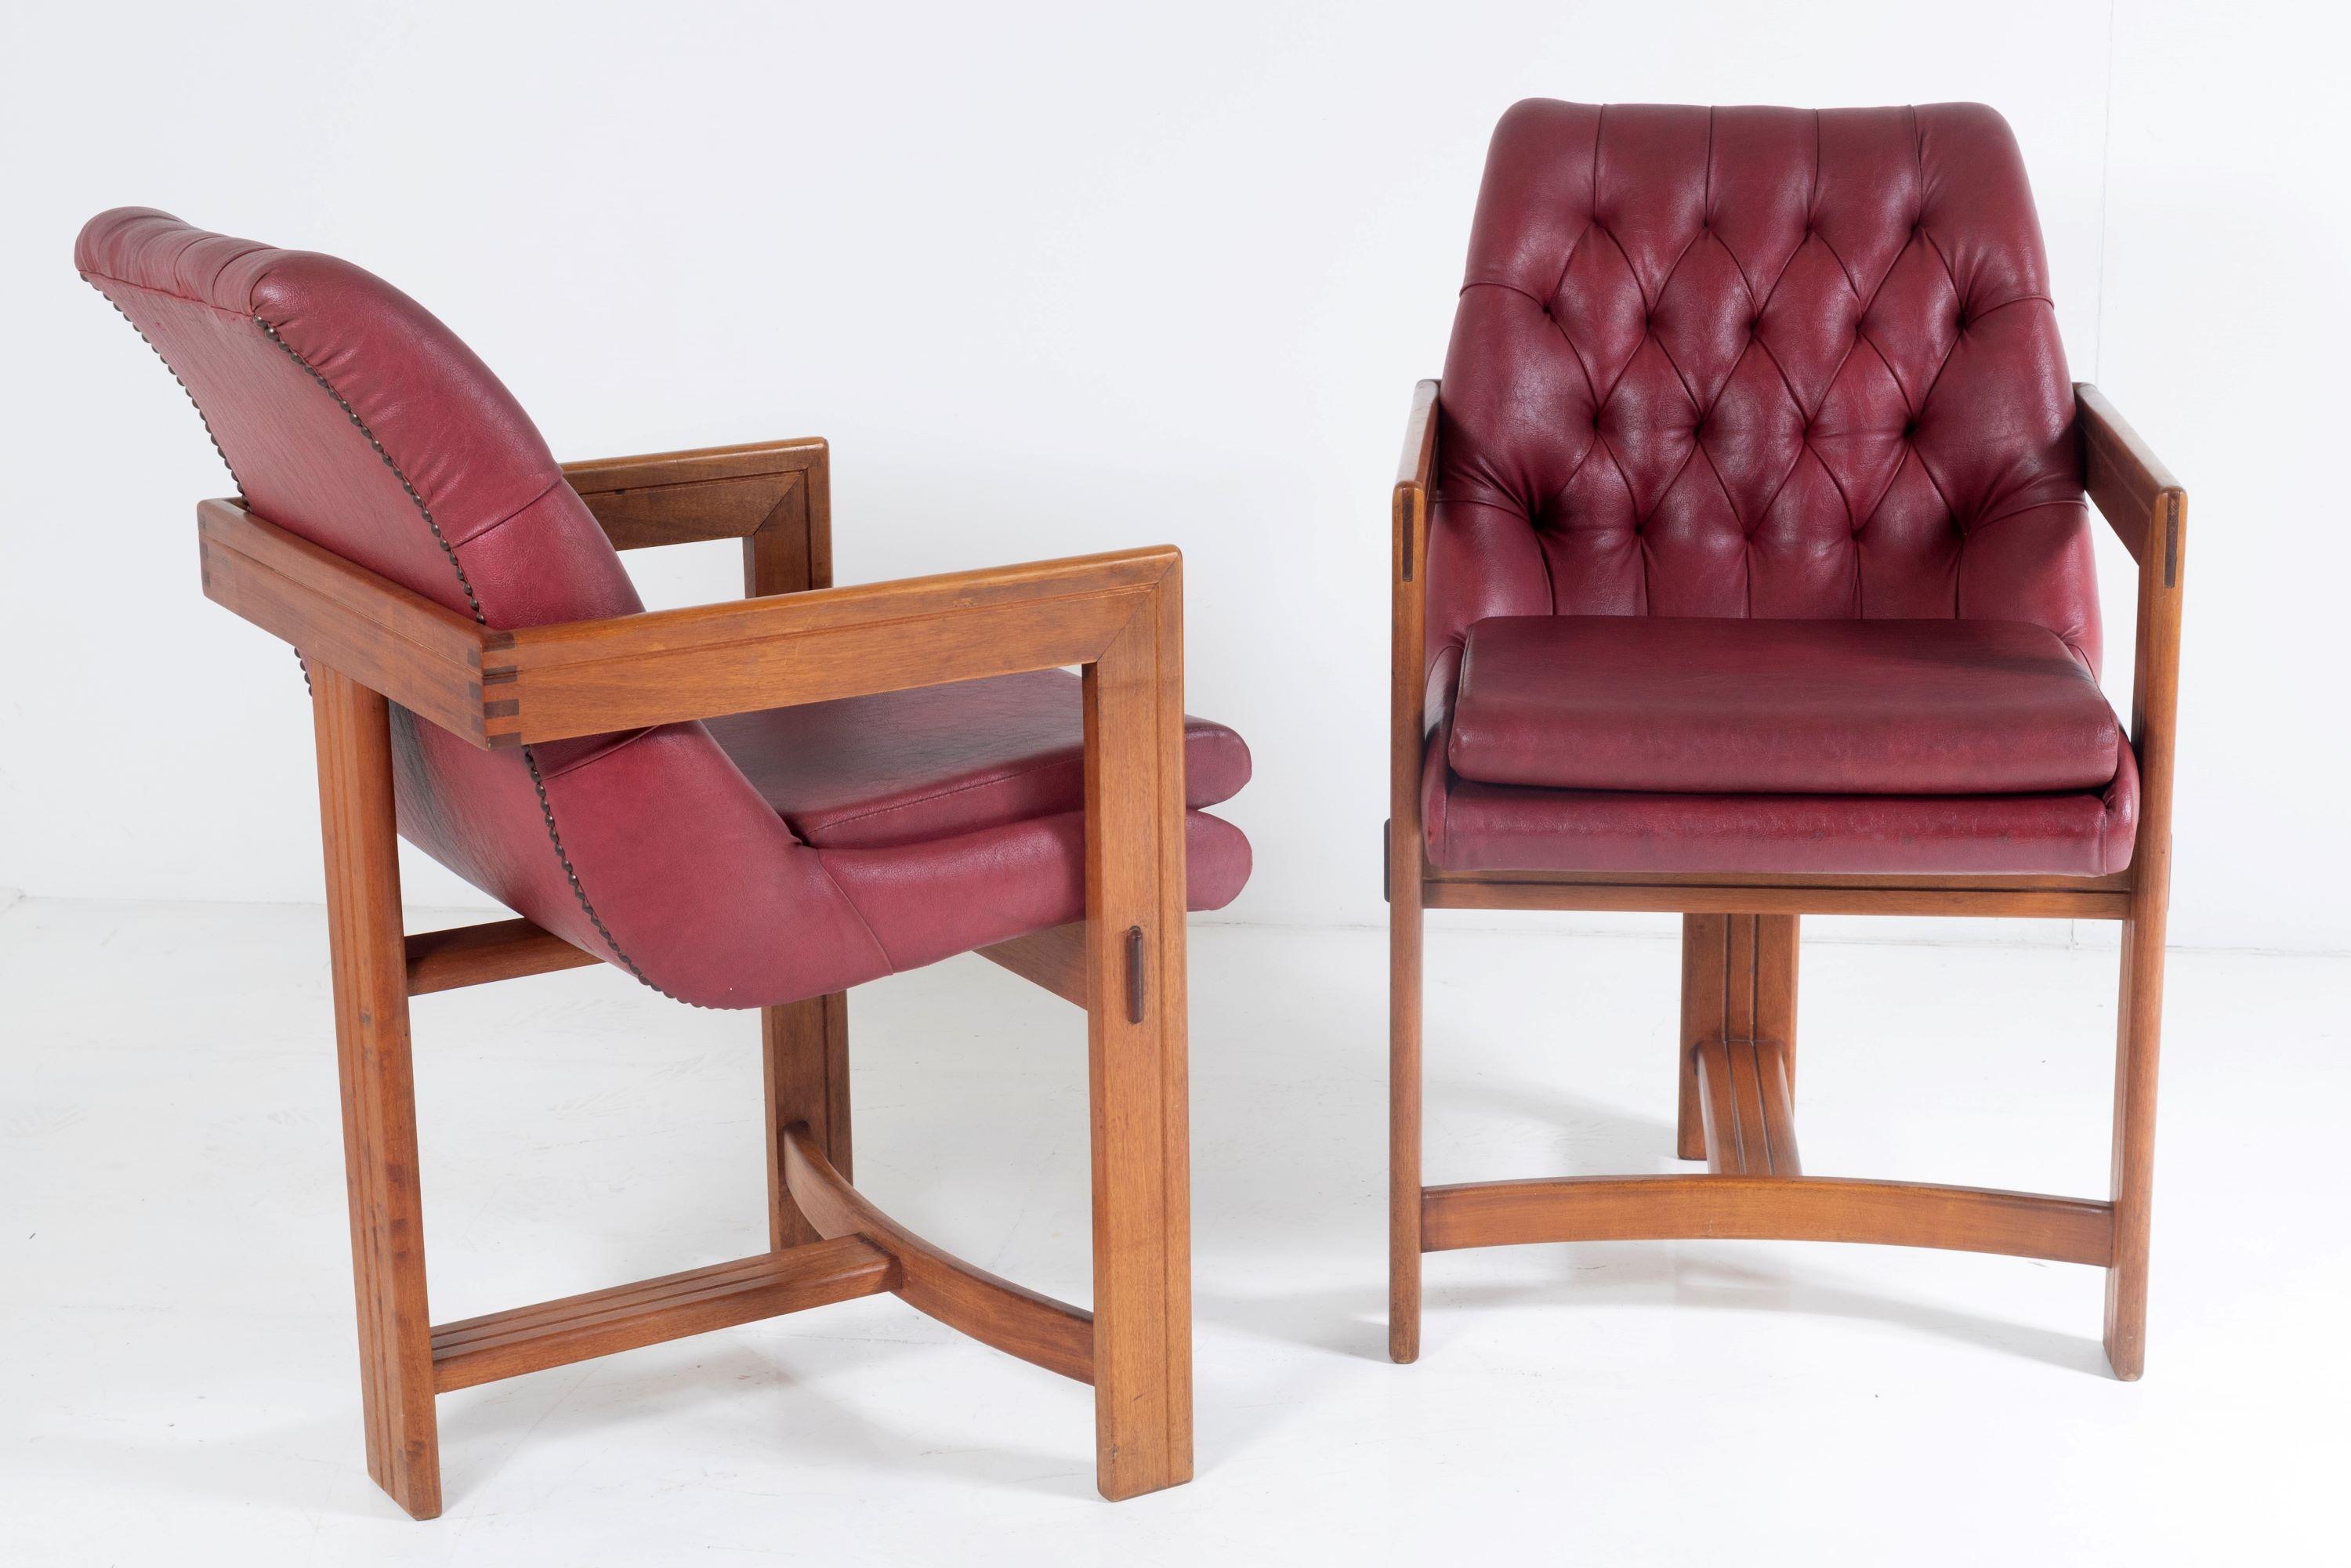 A pair of stylish Bauhaus influenced Library desk chairs, in the manner of Tobia Scarpa.
This unique pair have a wonderful style and colour. Beautifully crafted with two front legs rising to the arms which wrap around the back with a single central